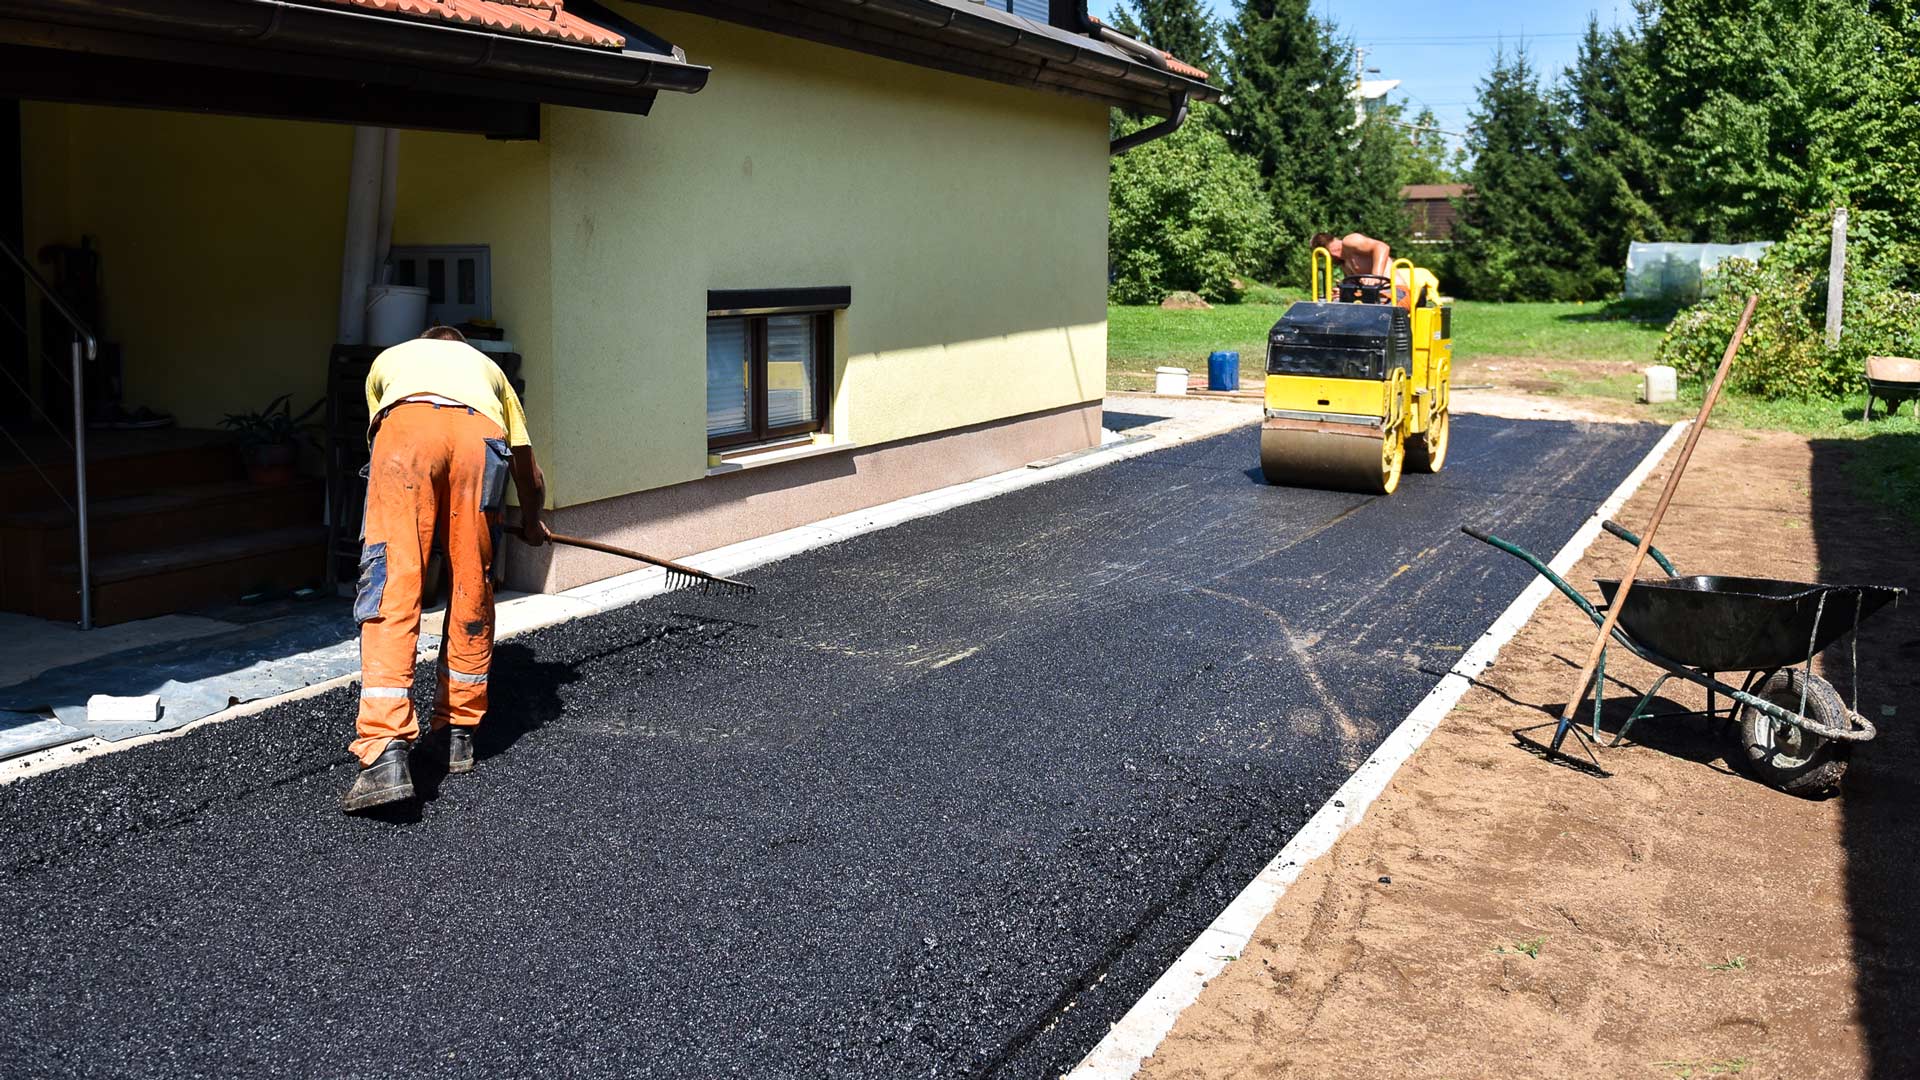 tarmac work that we are doing